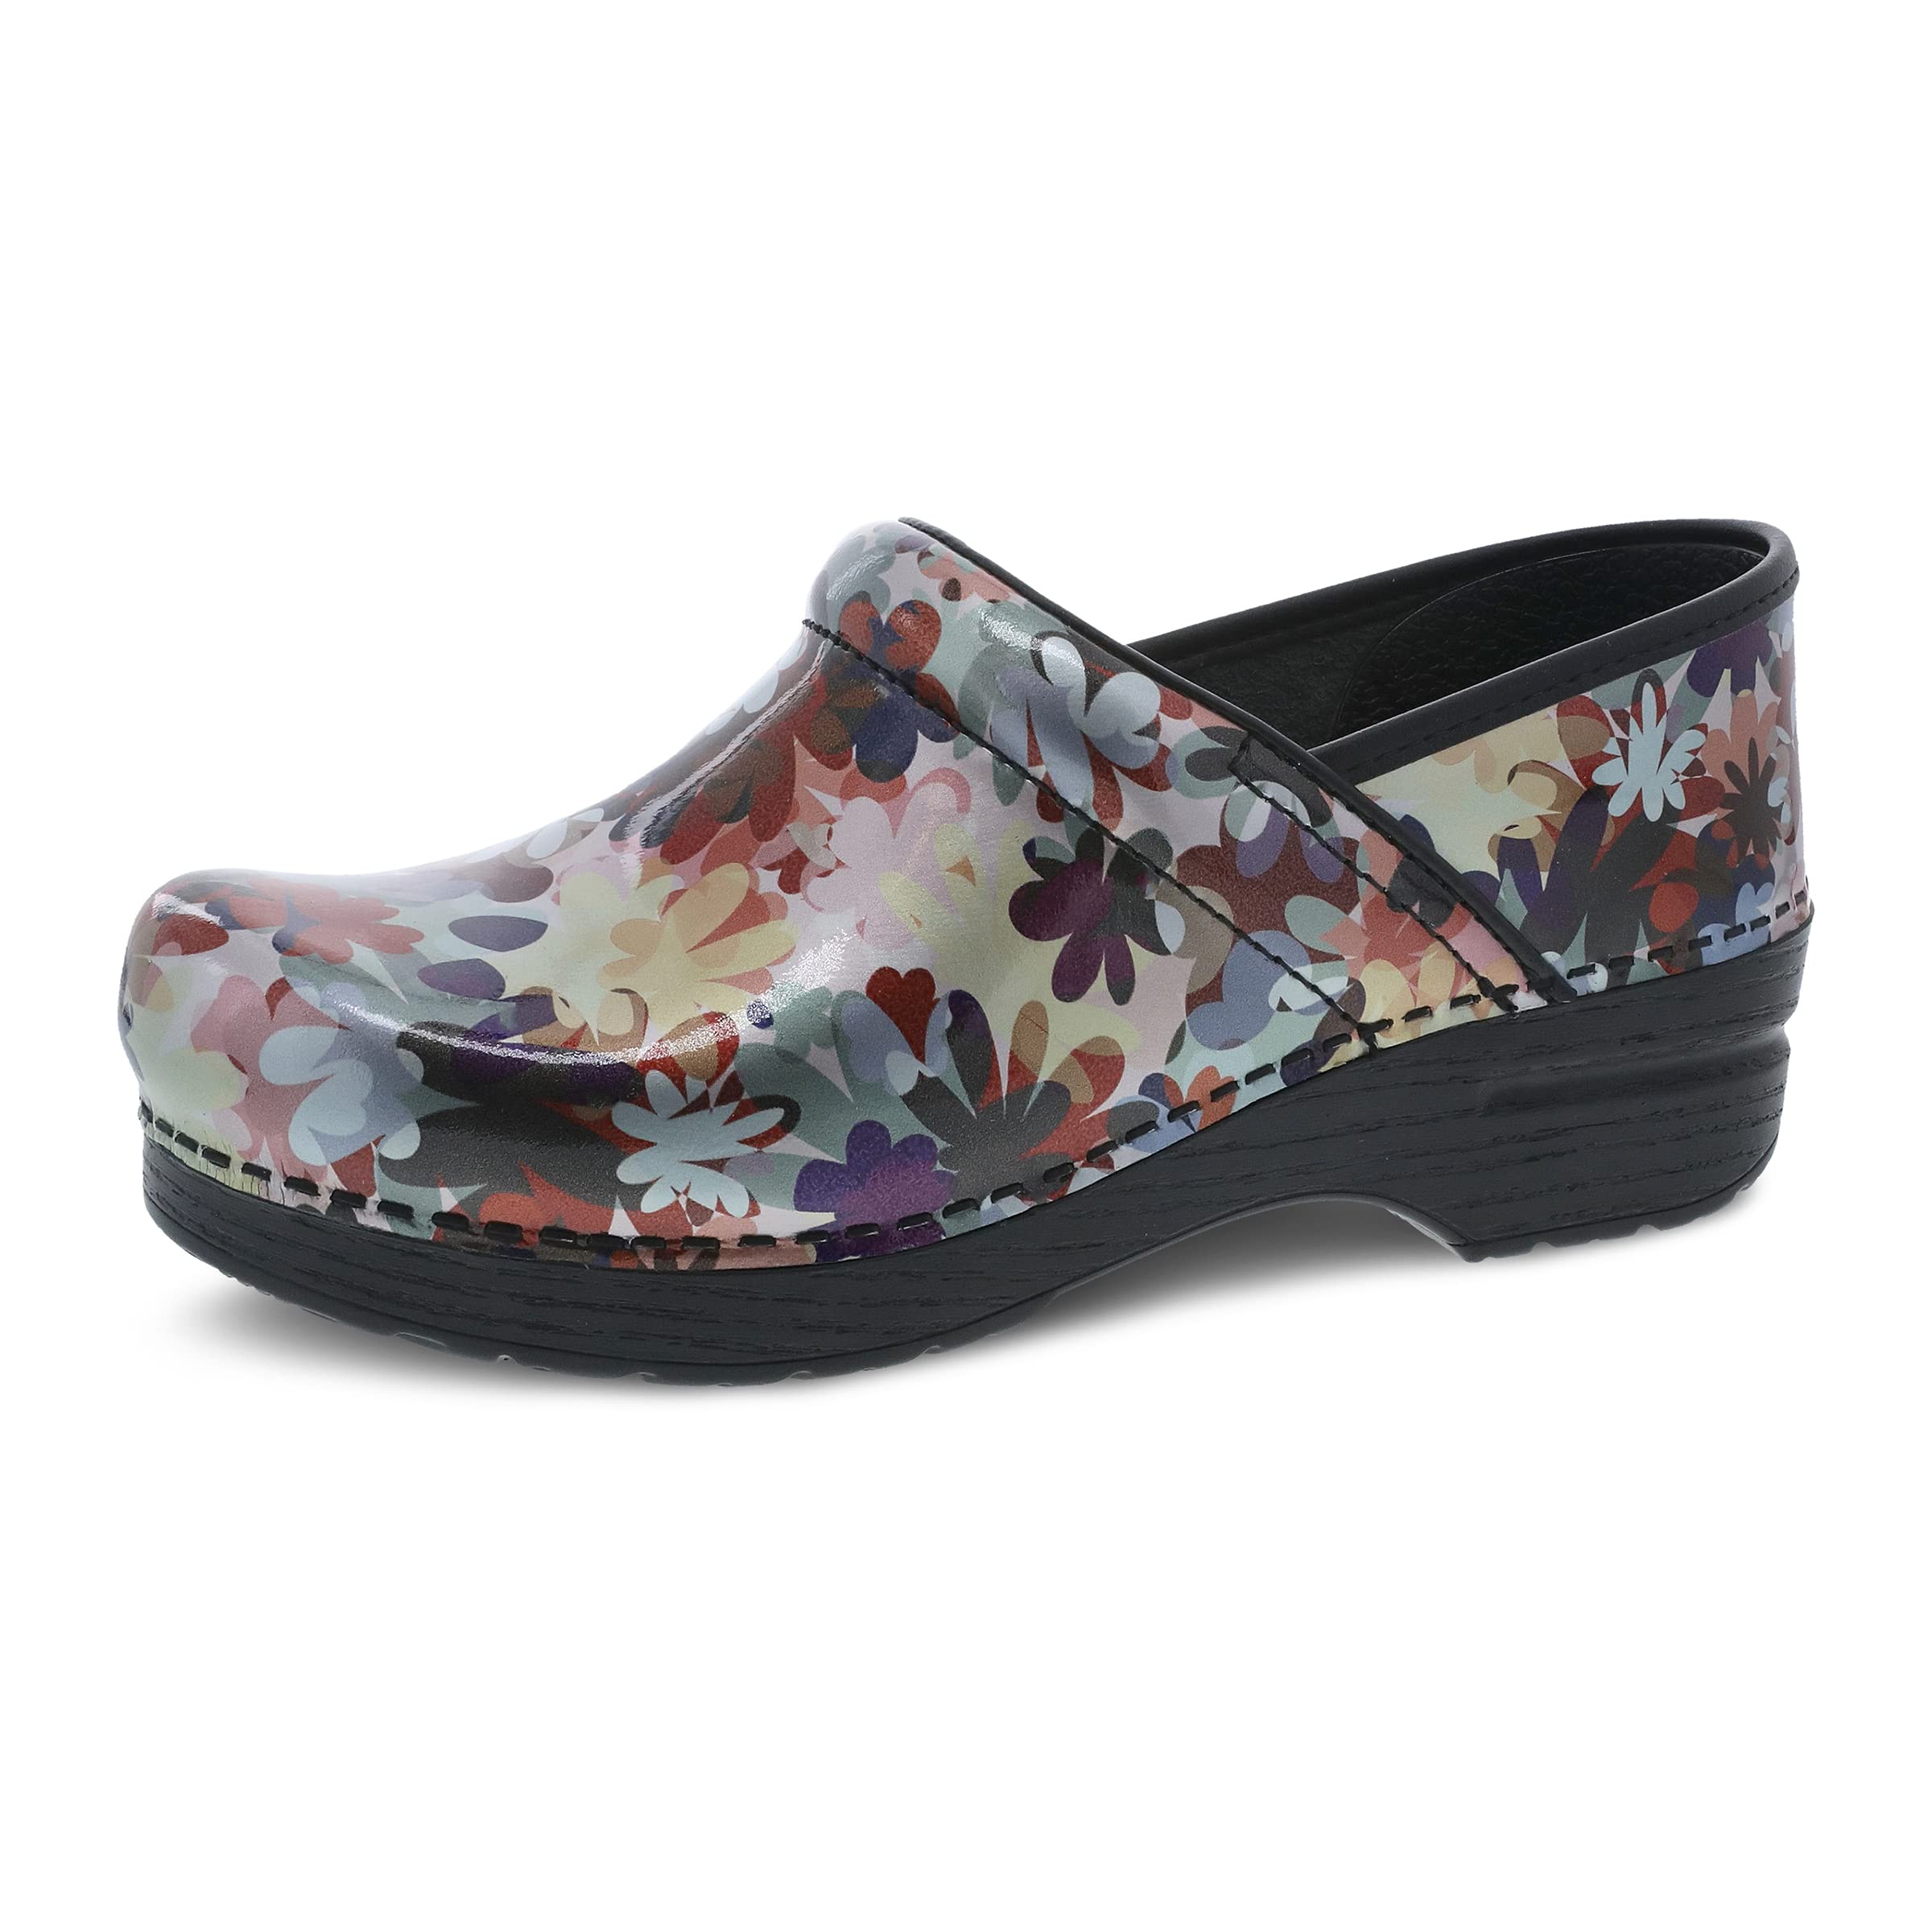 Dansko Womens Professional Boho Flower Slip-On clogs 55-6 M US - Anti-Fatigue Rocker Sole and Arch Support for comfort